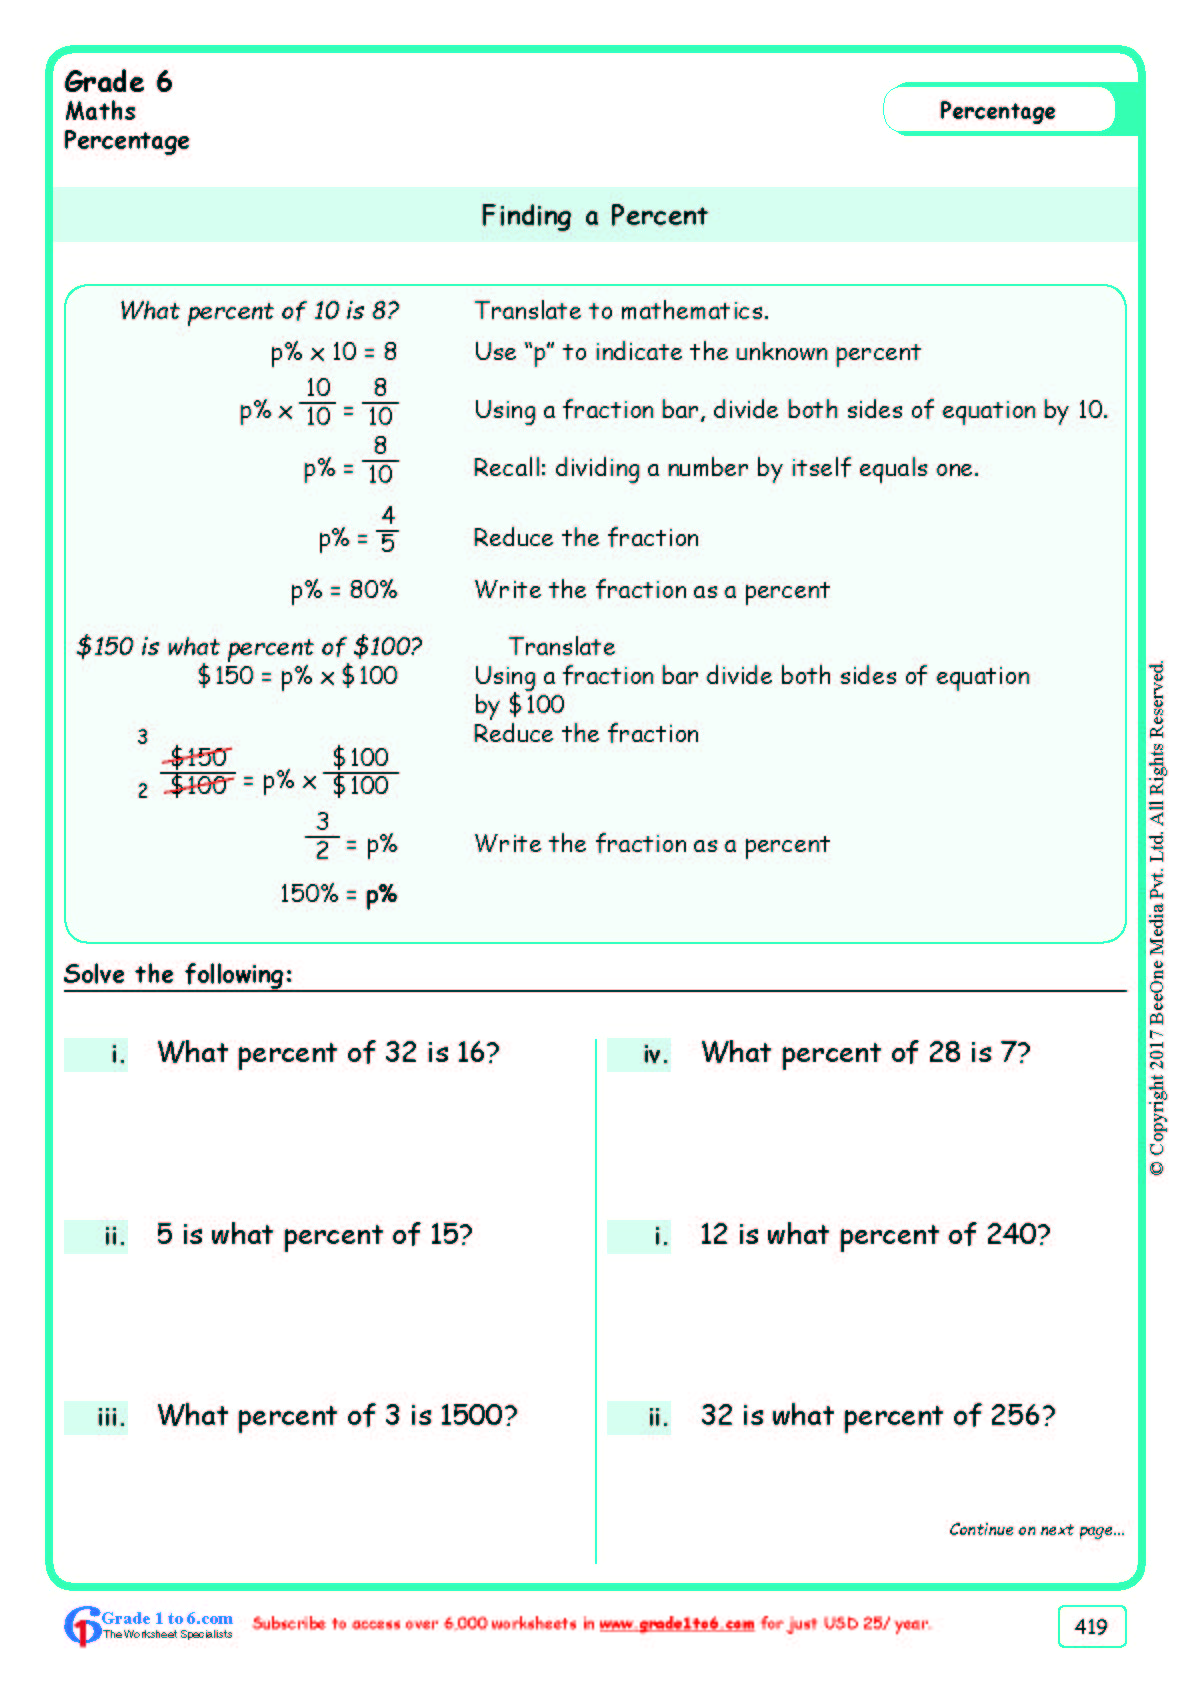 finding-percentages-worksheets-www-grade1to6